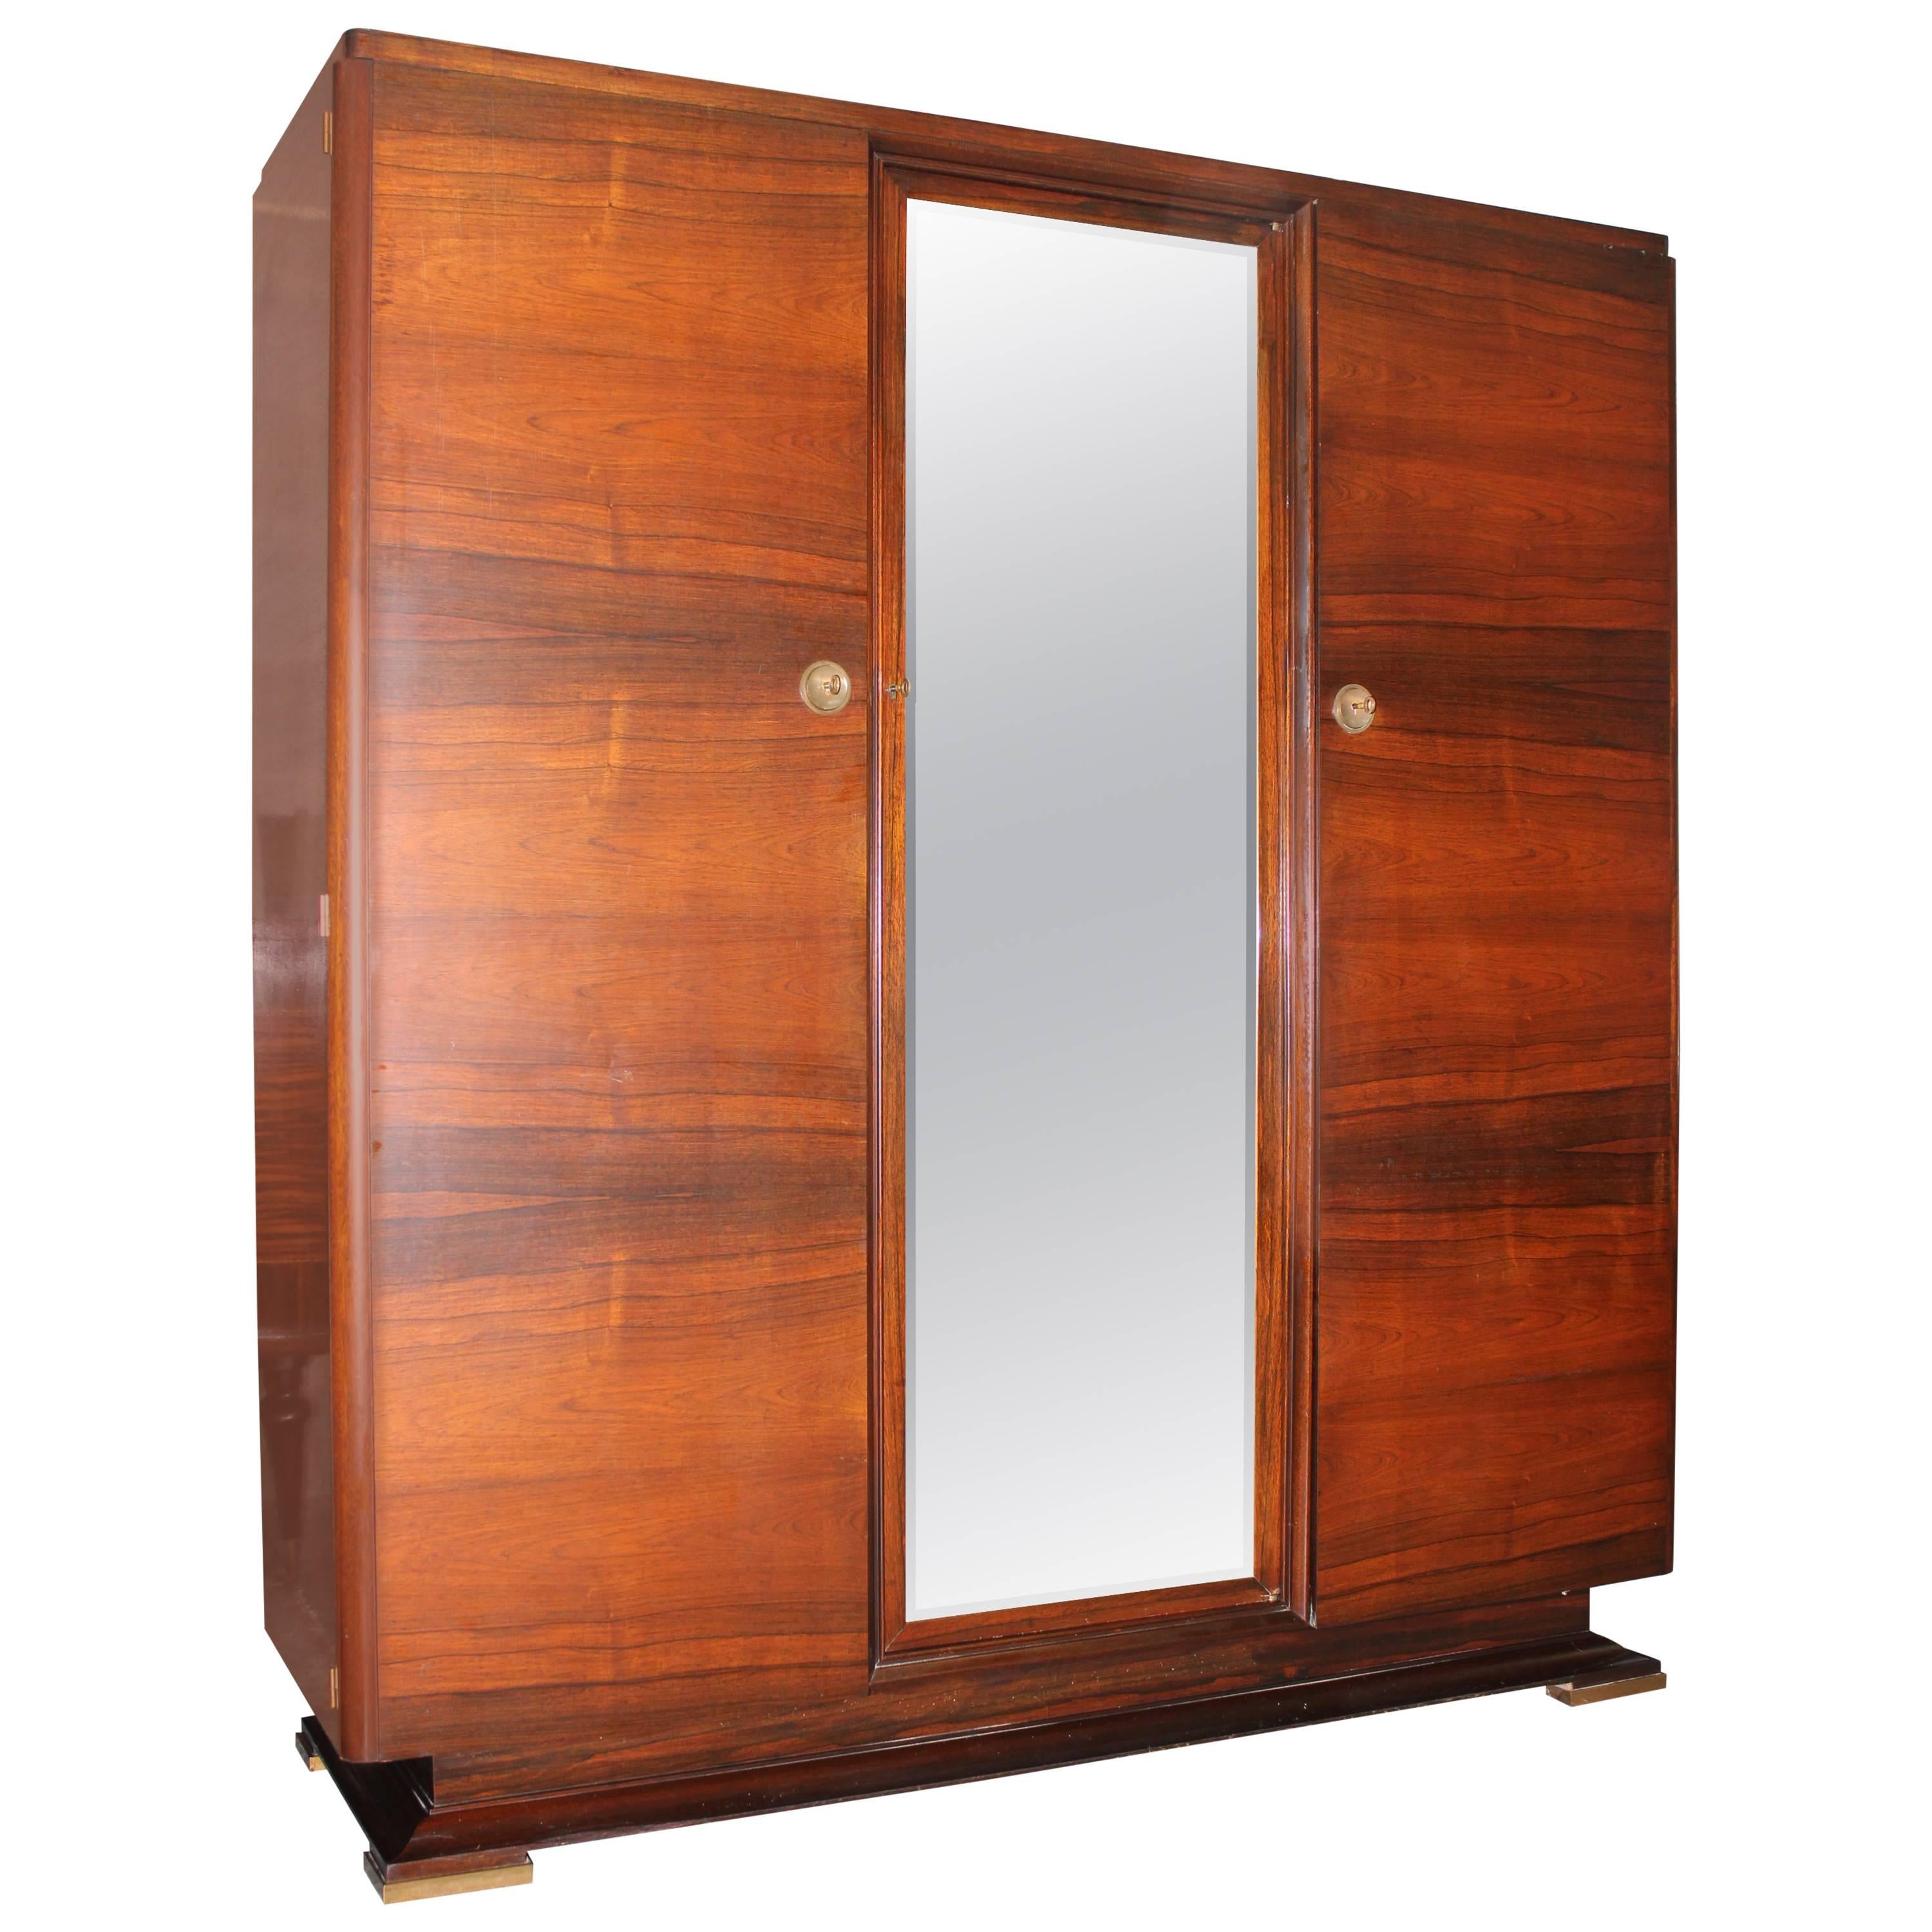 French Art Deco Masterpiece Palisander Armoire by Maxime Old, circa 1940s